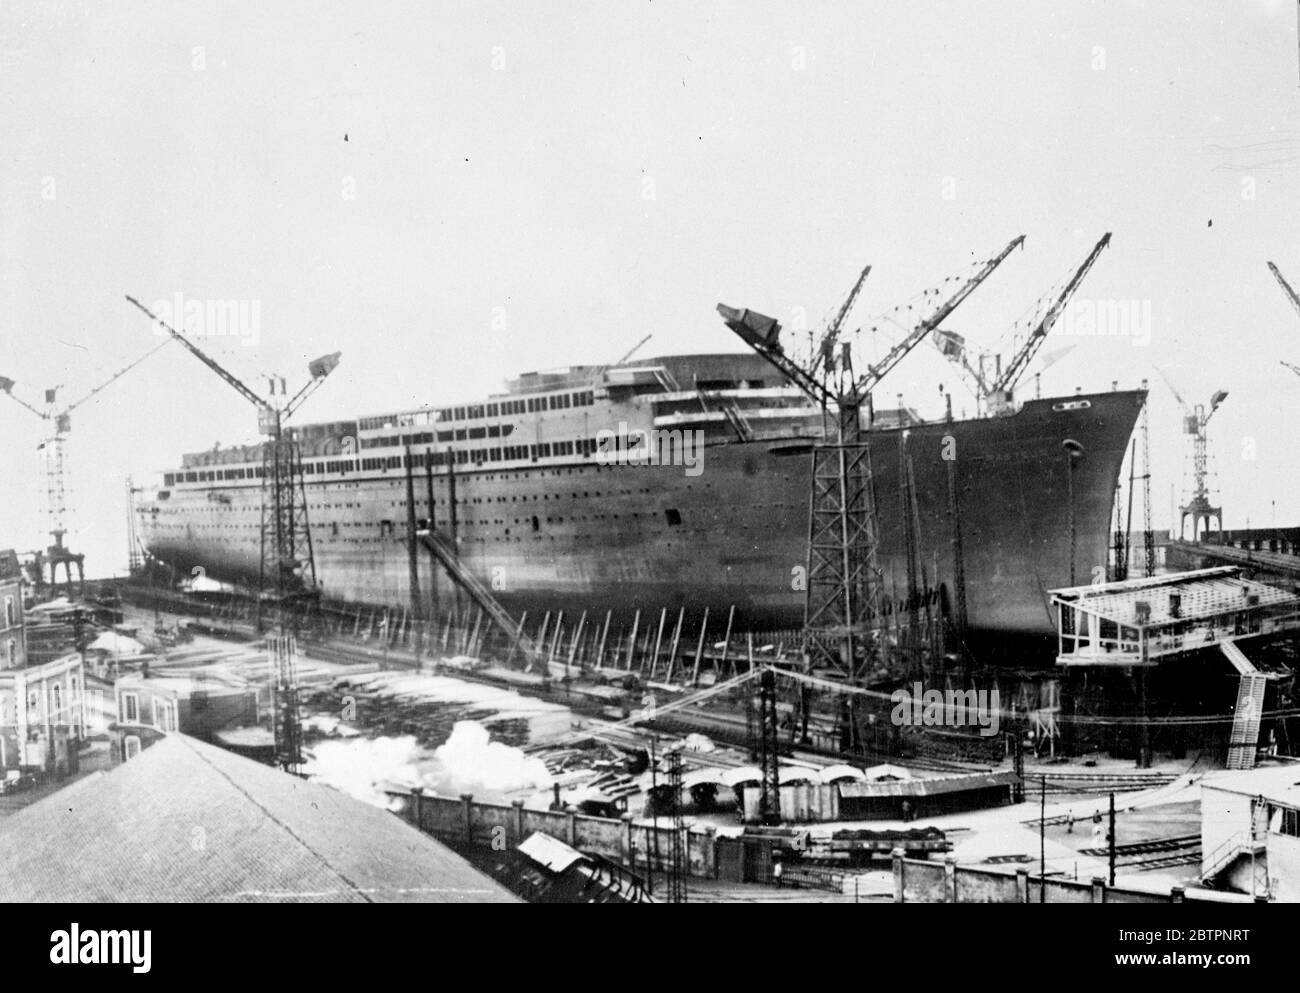 France is liner launched. The new French liner 'Pasteur', built to replace 'L'At'antique' destroyed by fire four years ago, was launched at St Razaire. The vessel will be used on the south American route. 15 February 1938 Stock Photo